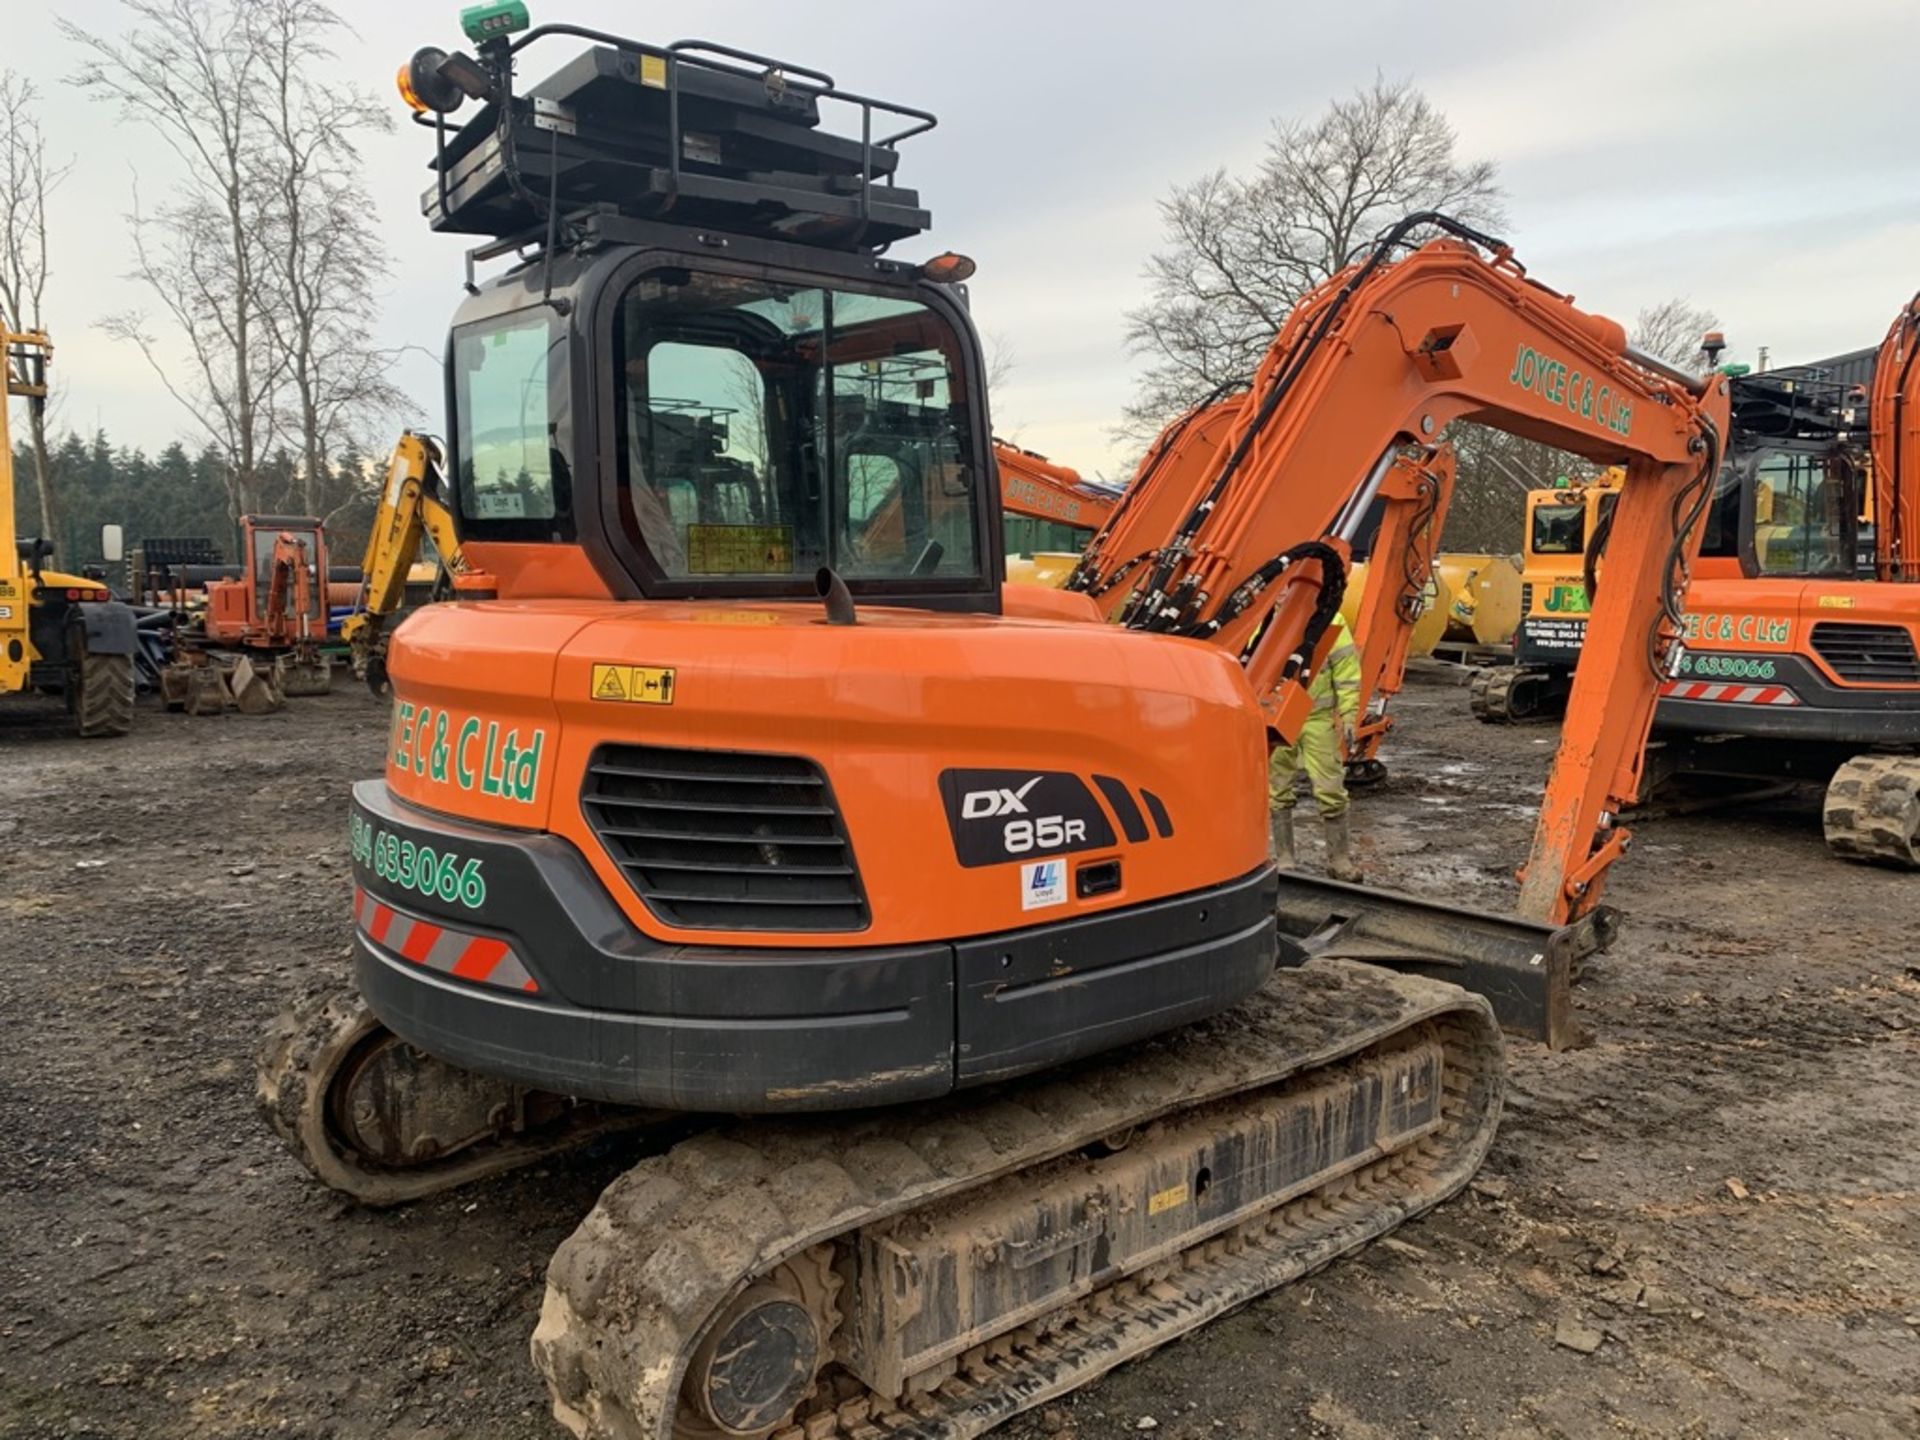 Doosan, DX85R-3 8.5 Ton Excavator Serial No. DHKCEAAVE6002291 Date of Manufacture: 2018 Piped , - Image 4 of 6